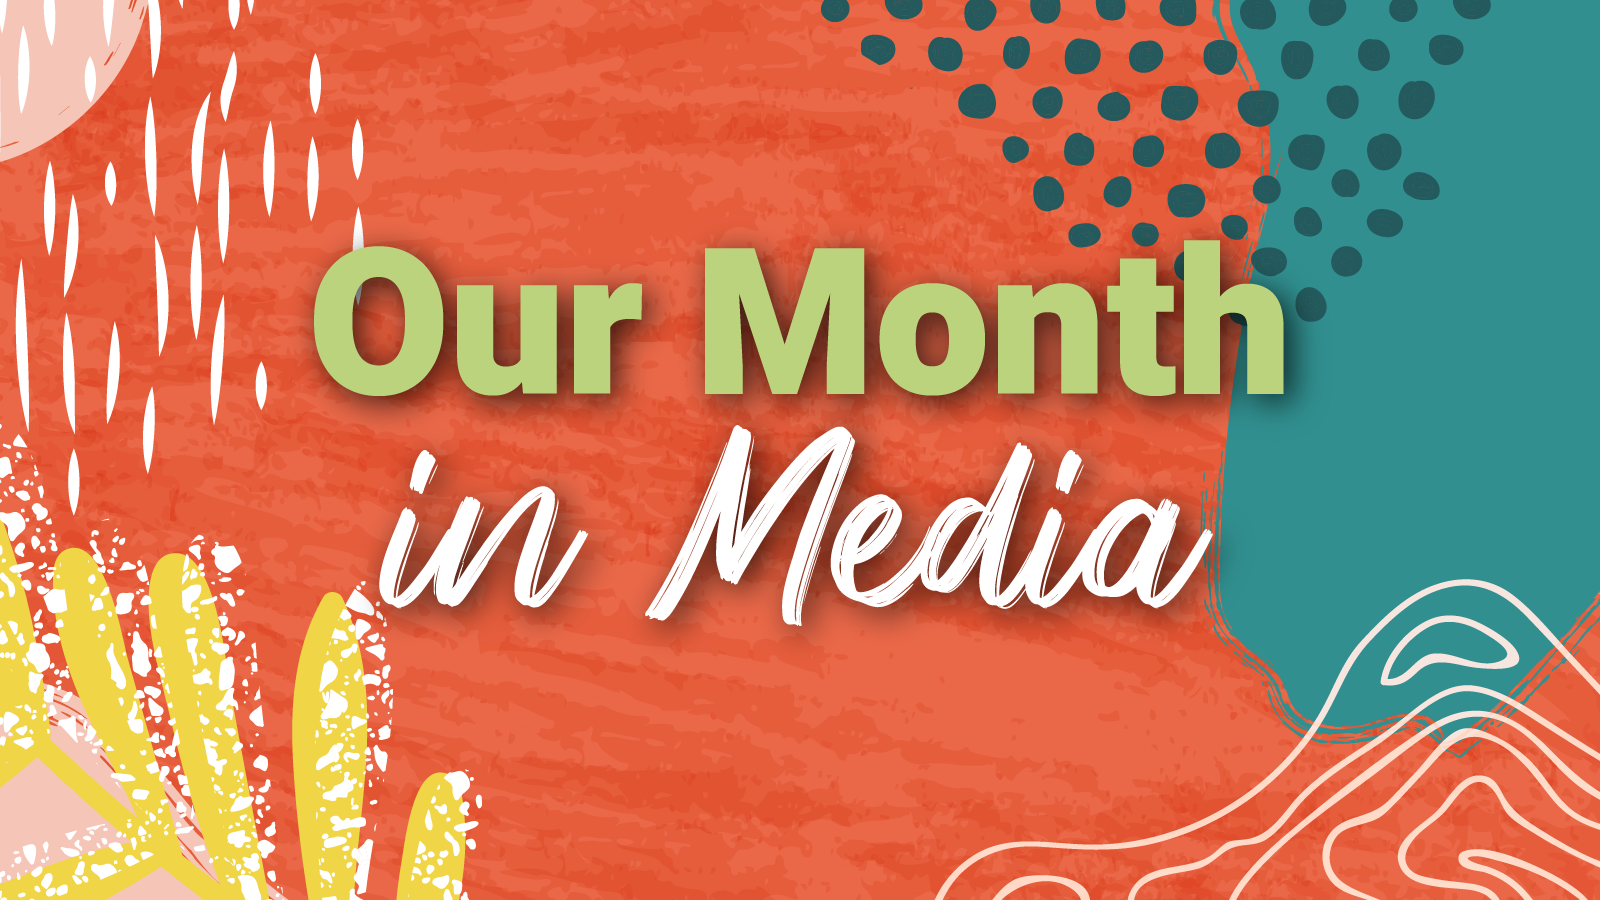 "Our Month in Media" on a orange background with dots and line design elements